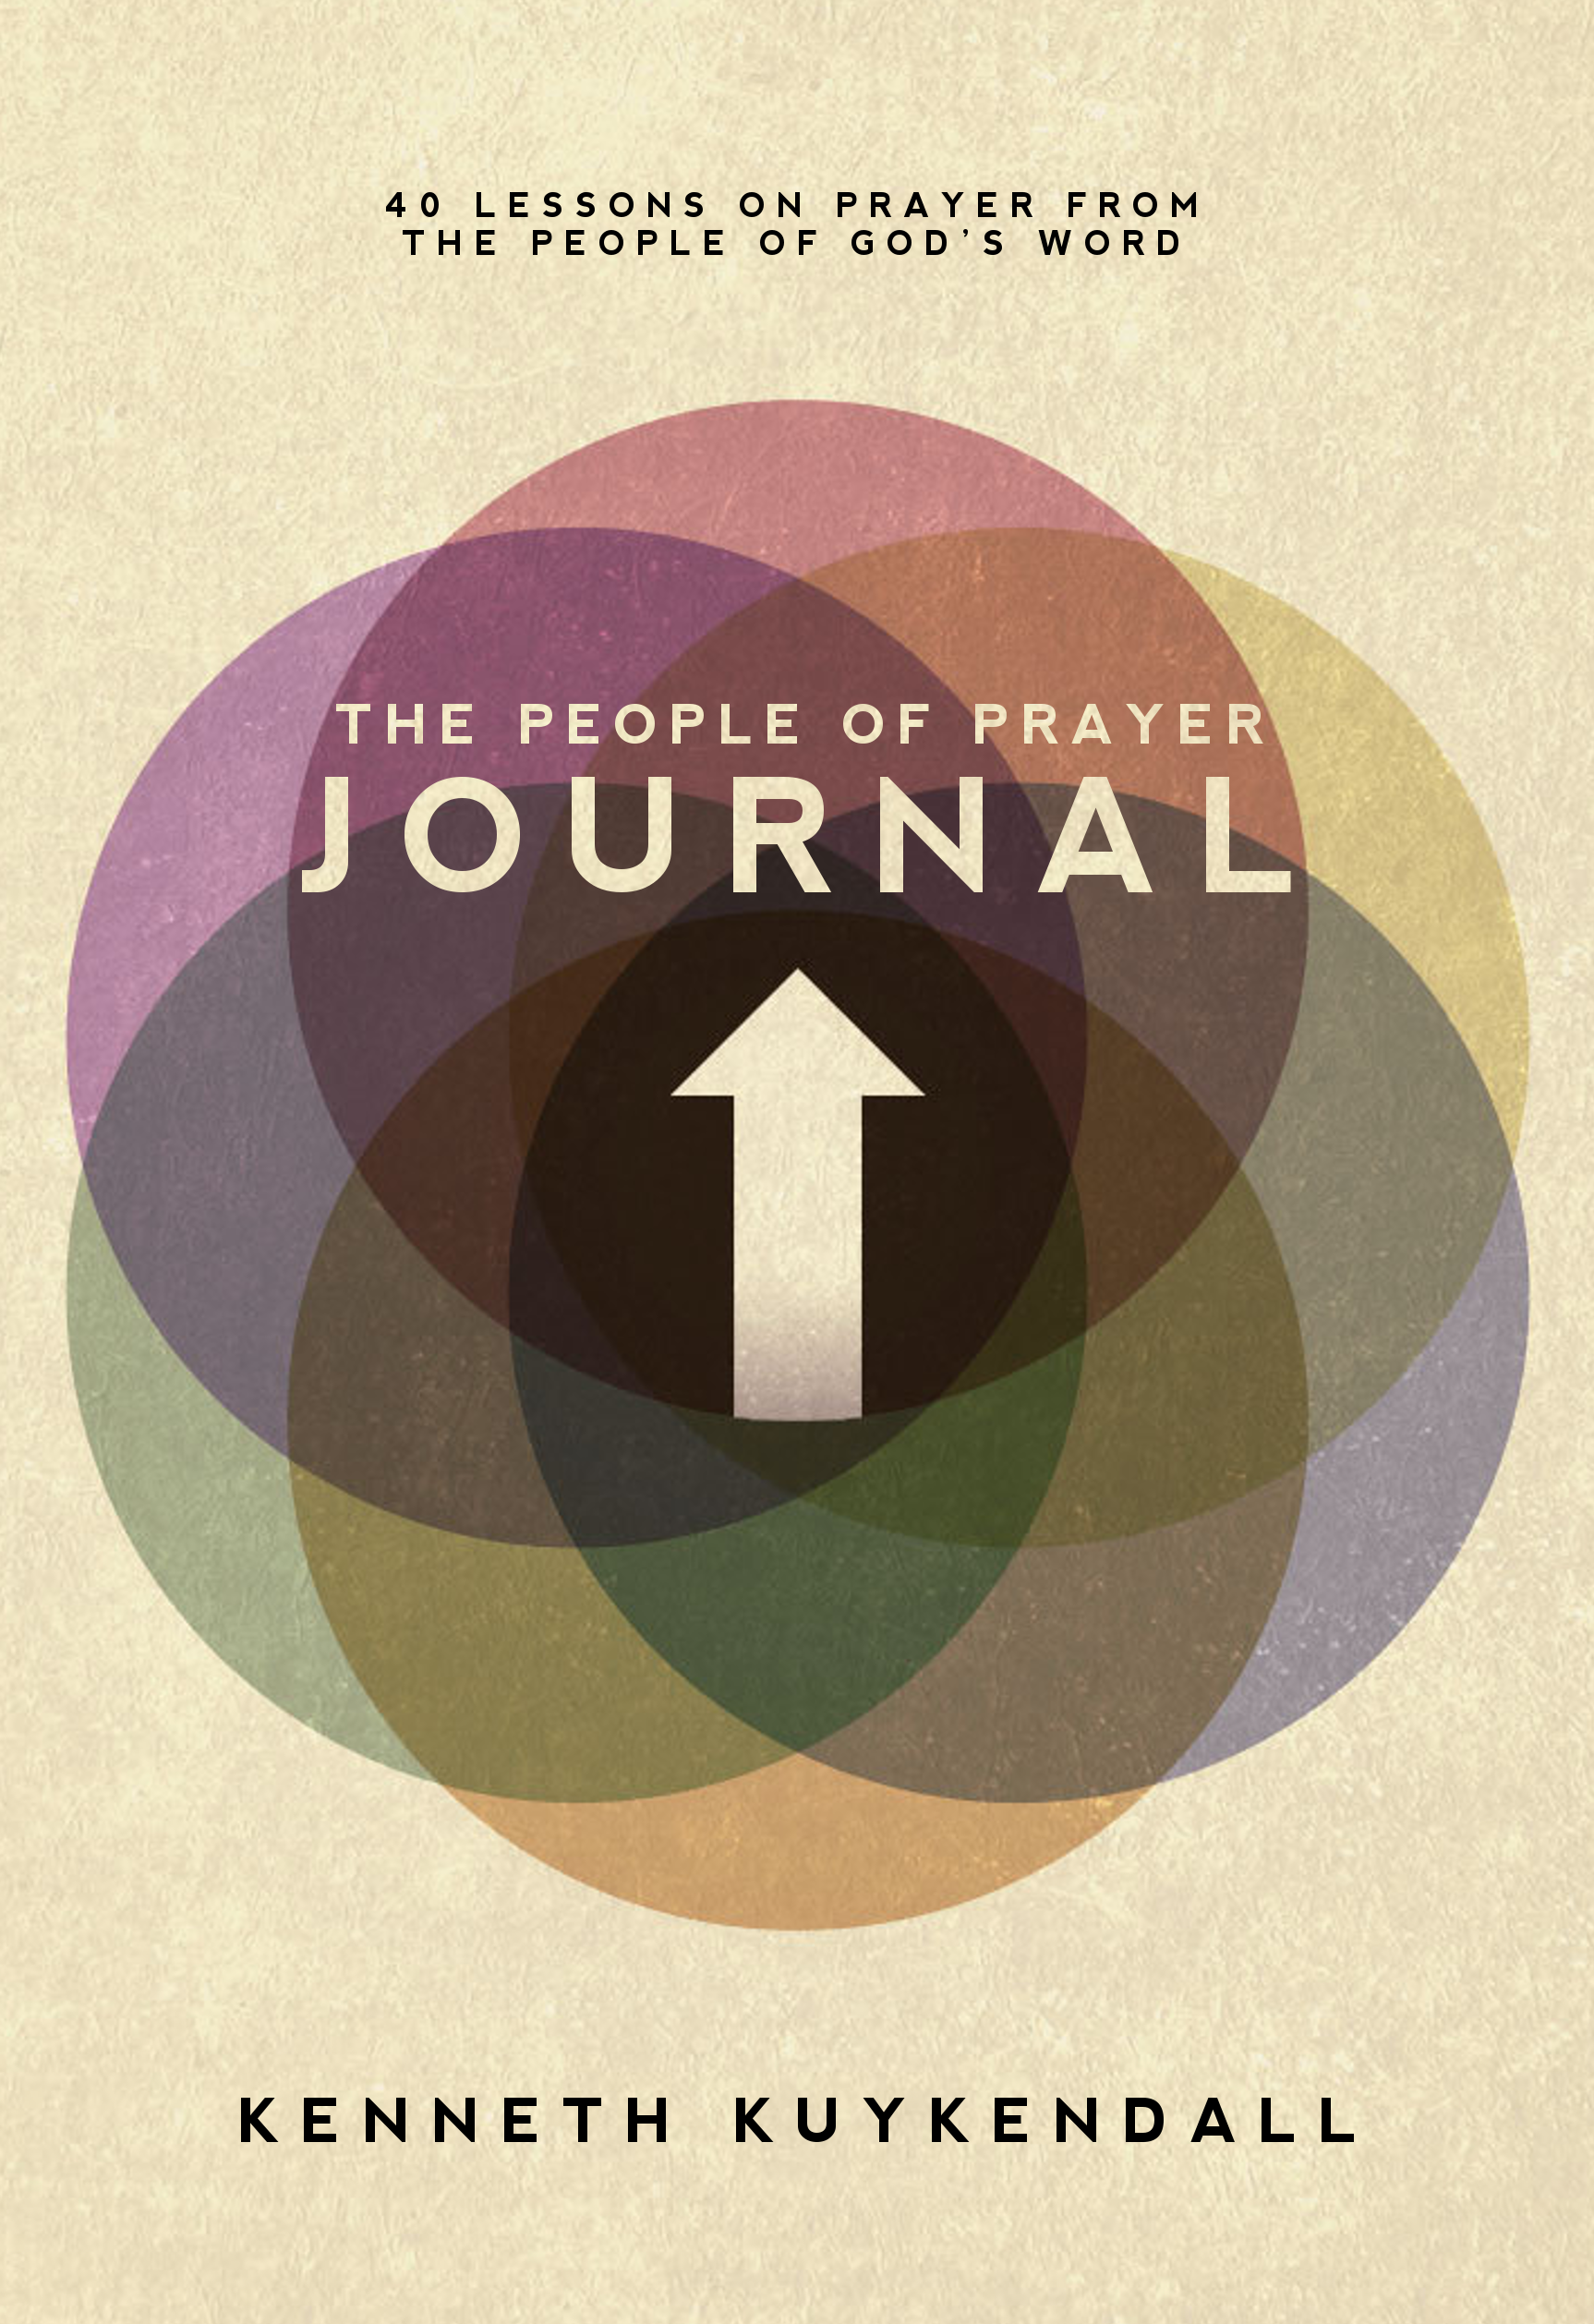 The People of Prayer Journal